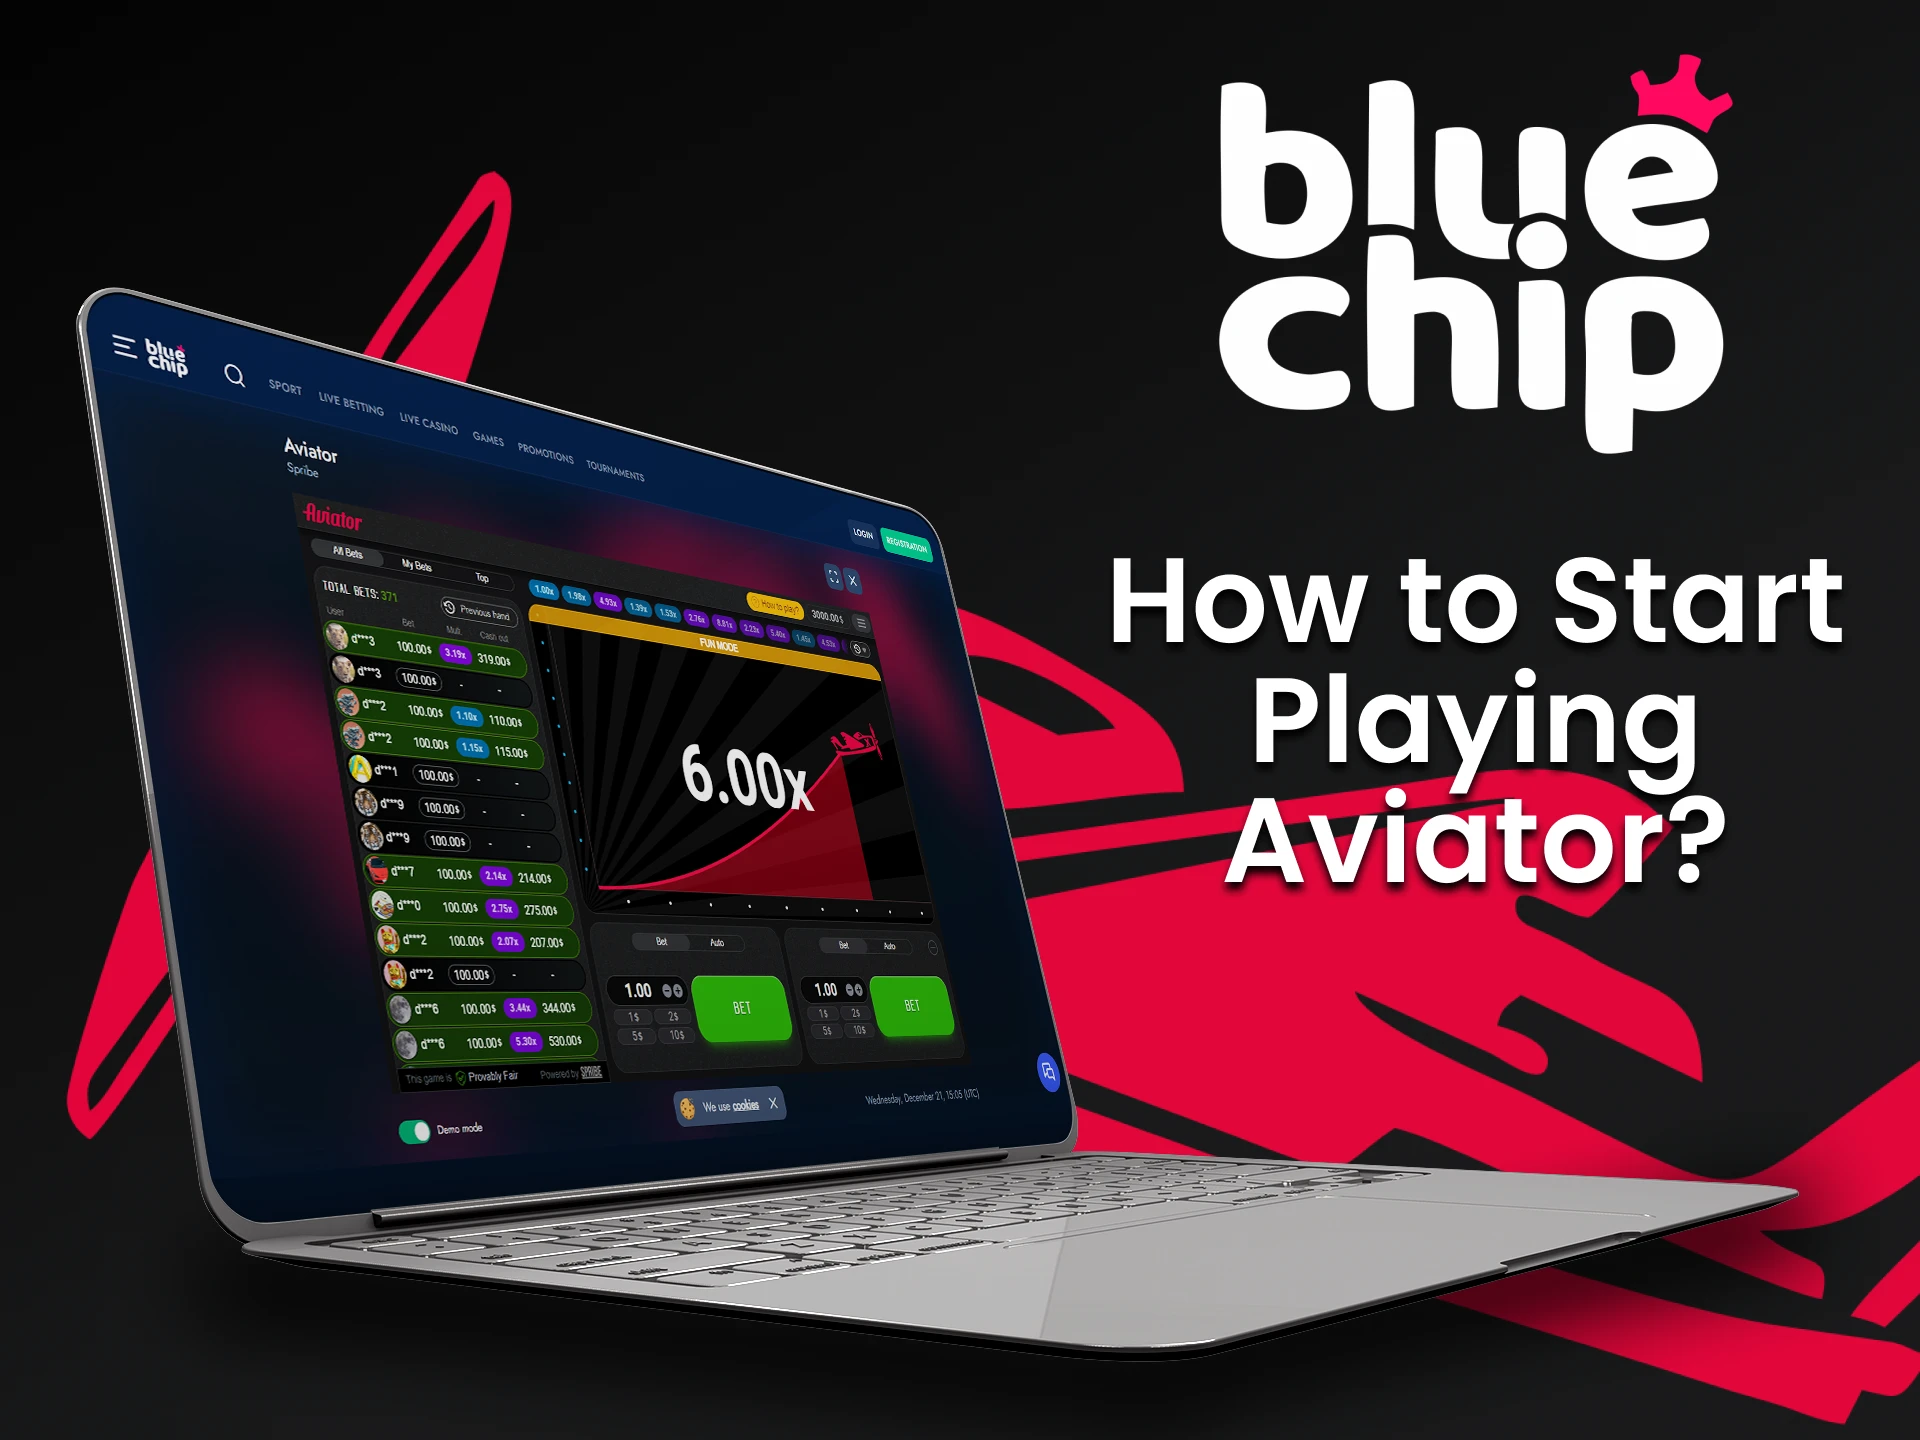 You can see the instructions to start playing the BlueChip Aviator game.